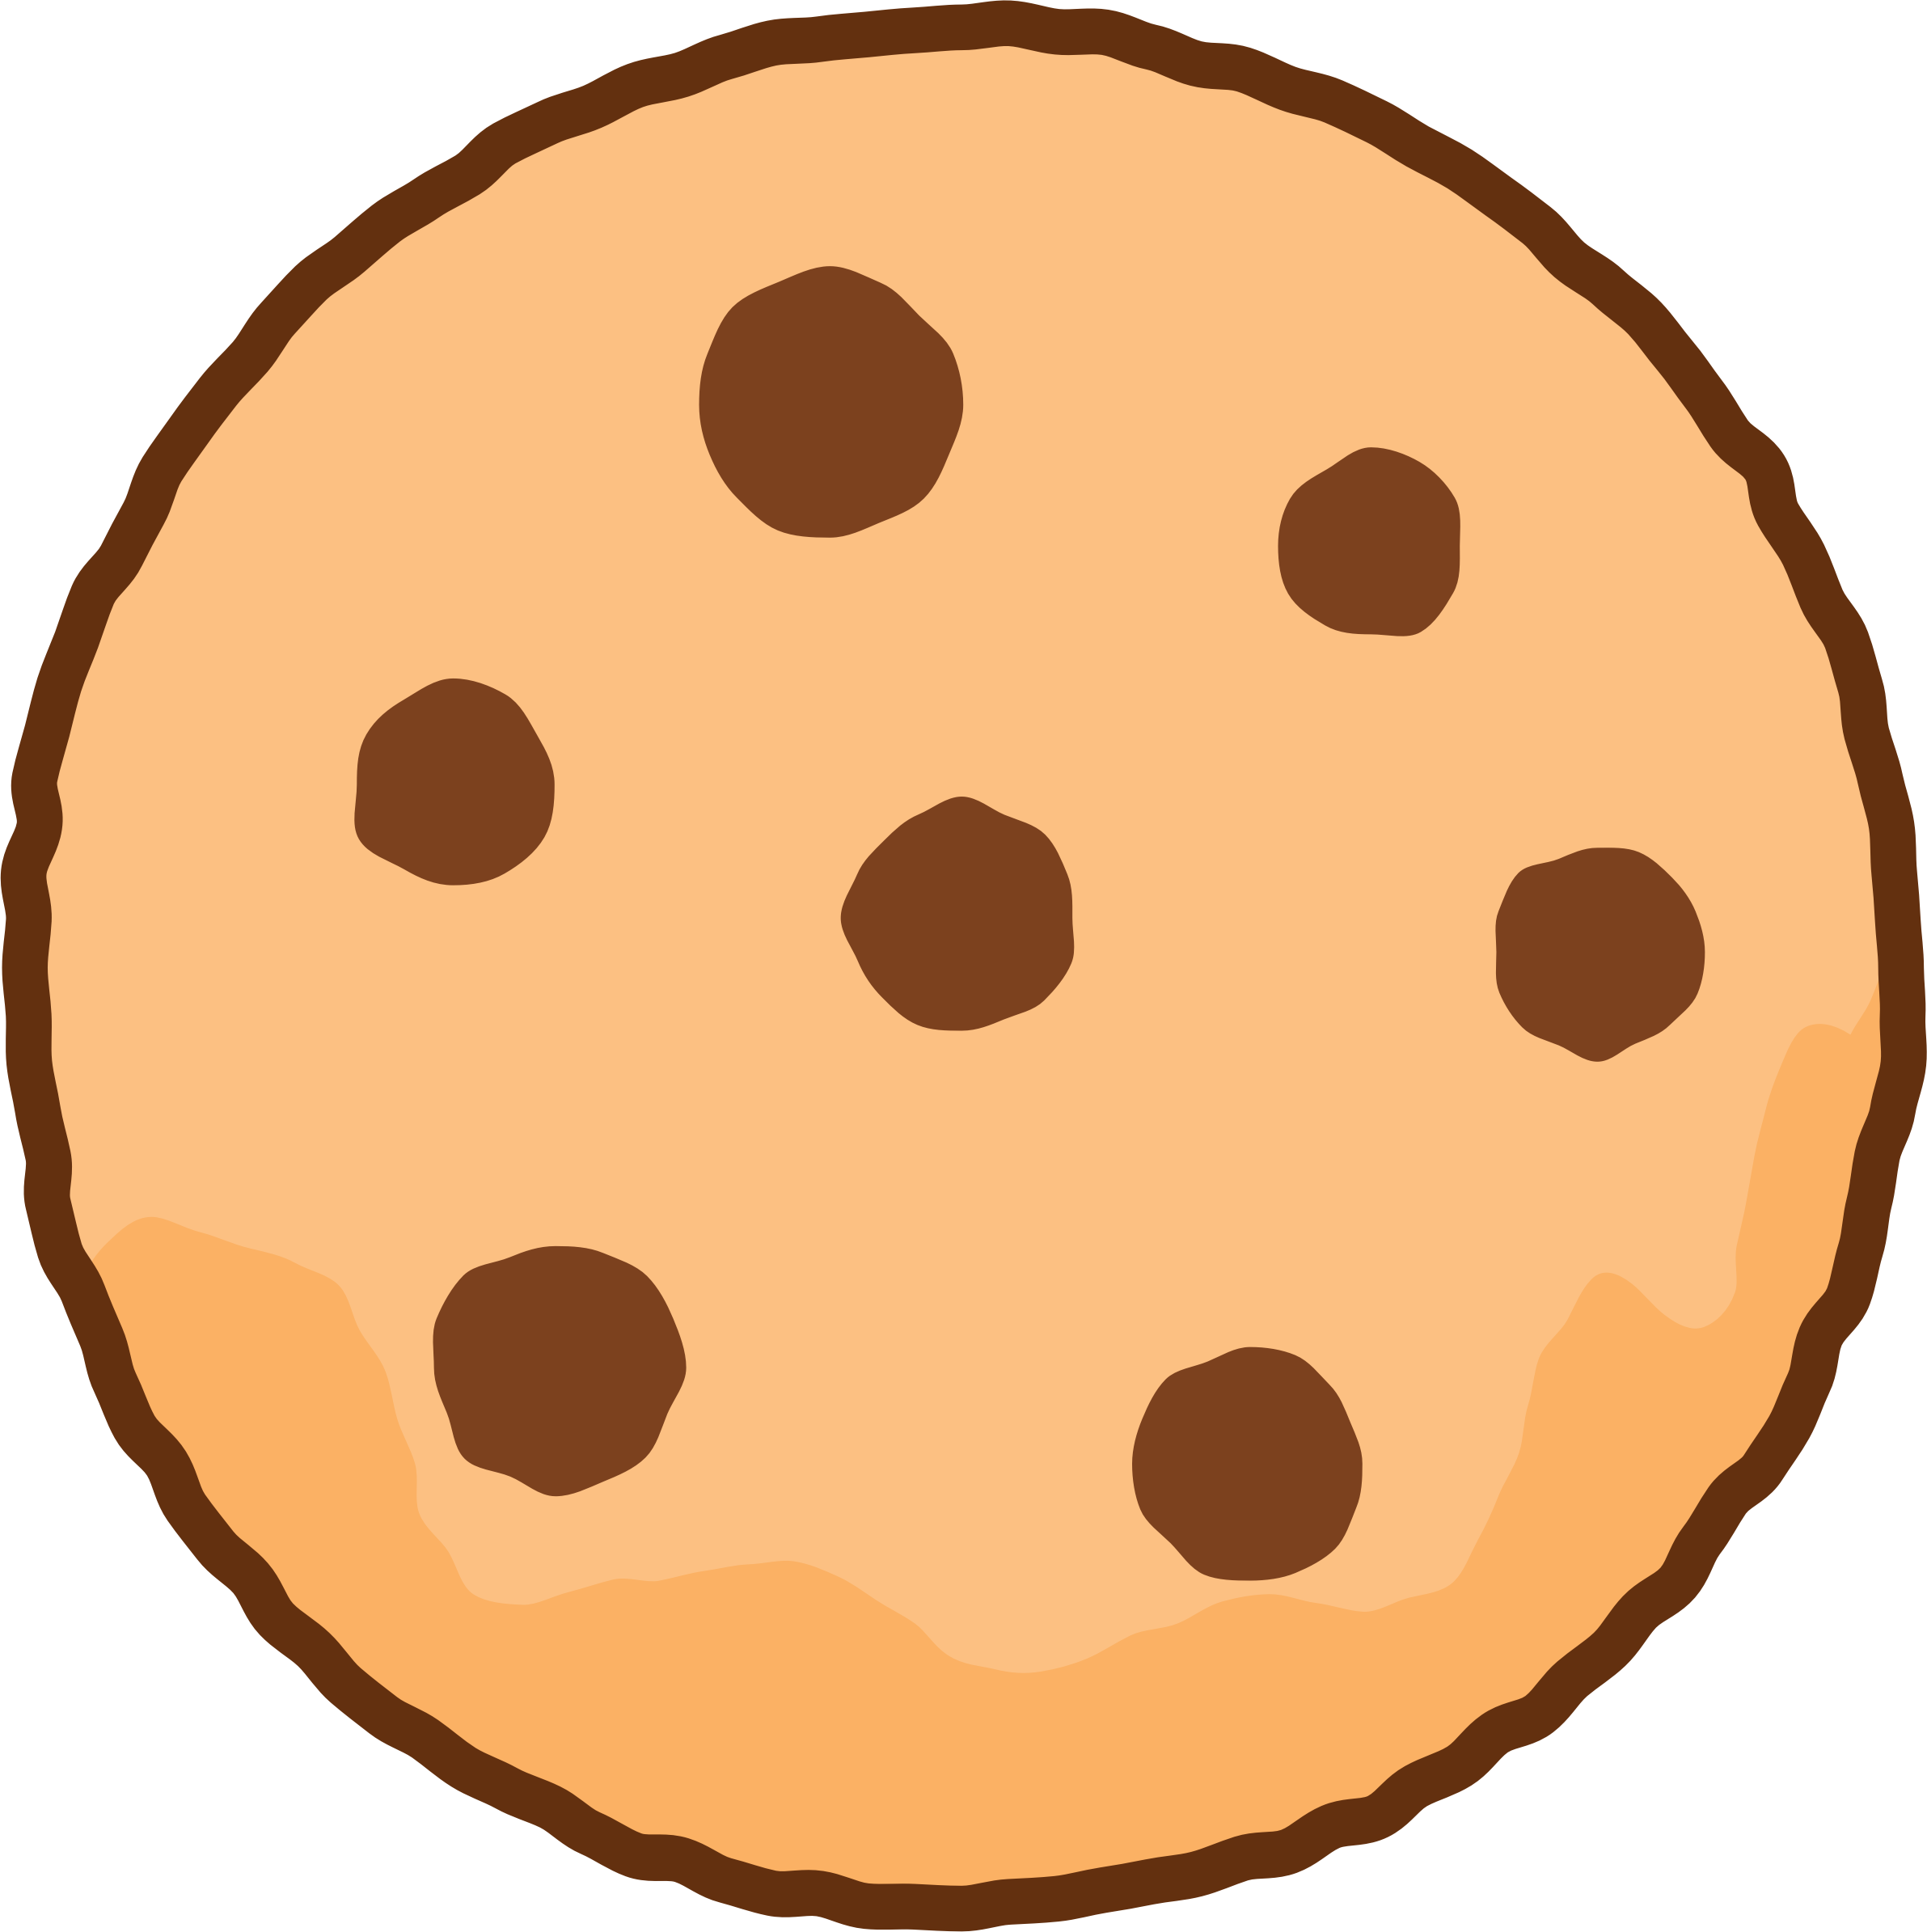 Cookie Clipart Kawaii - If You Give A Mouse A Cookie Clipart.